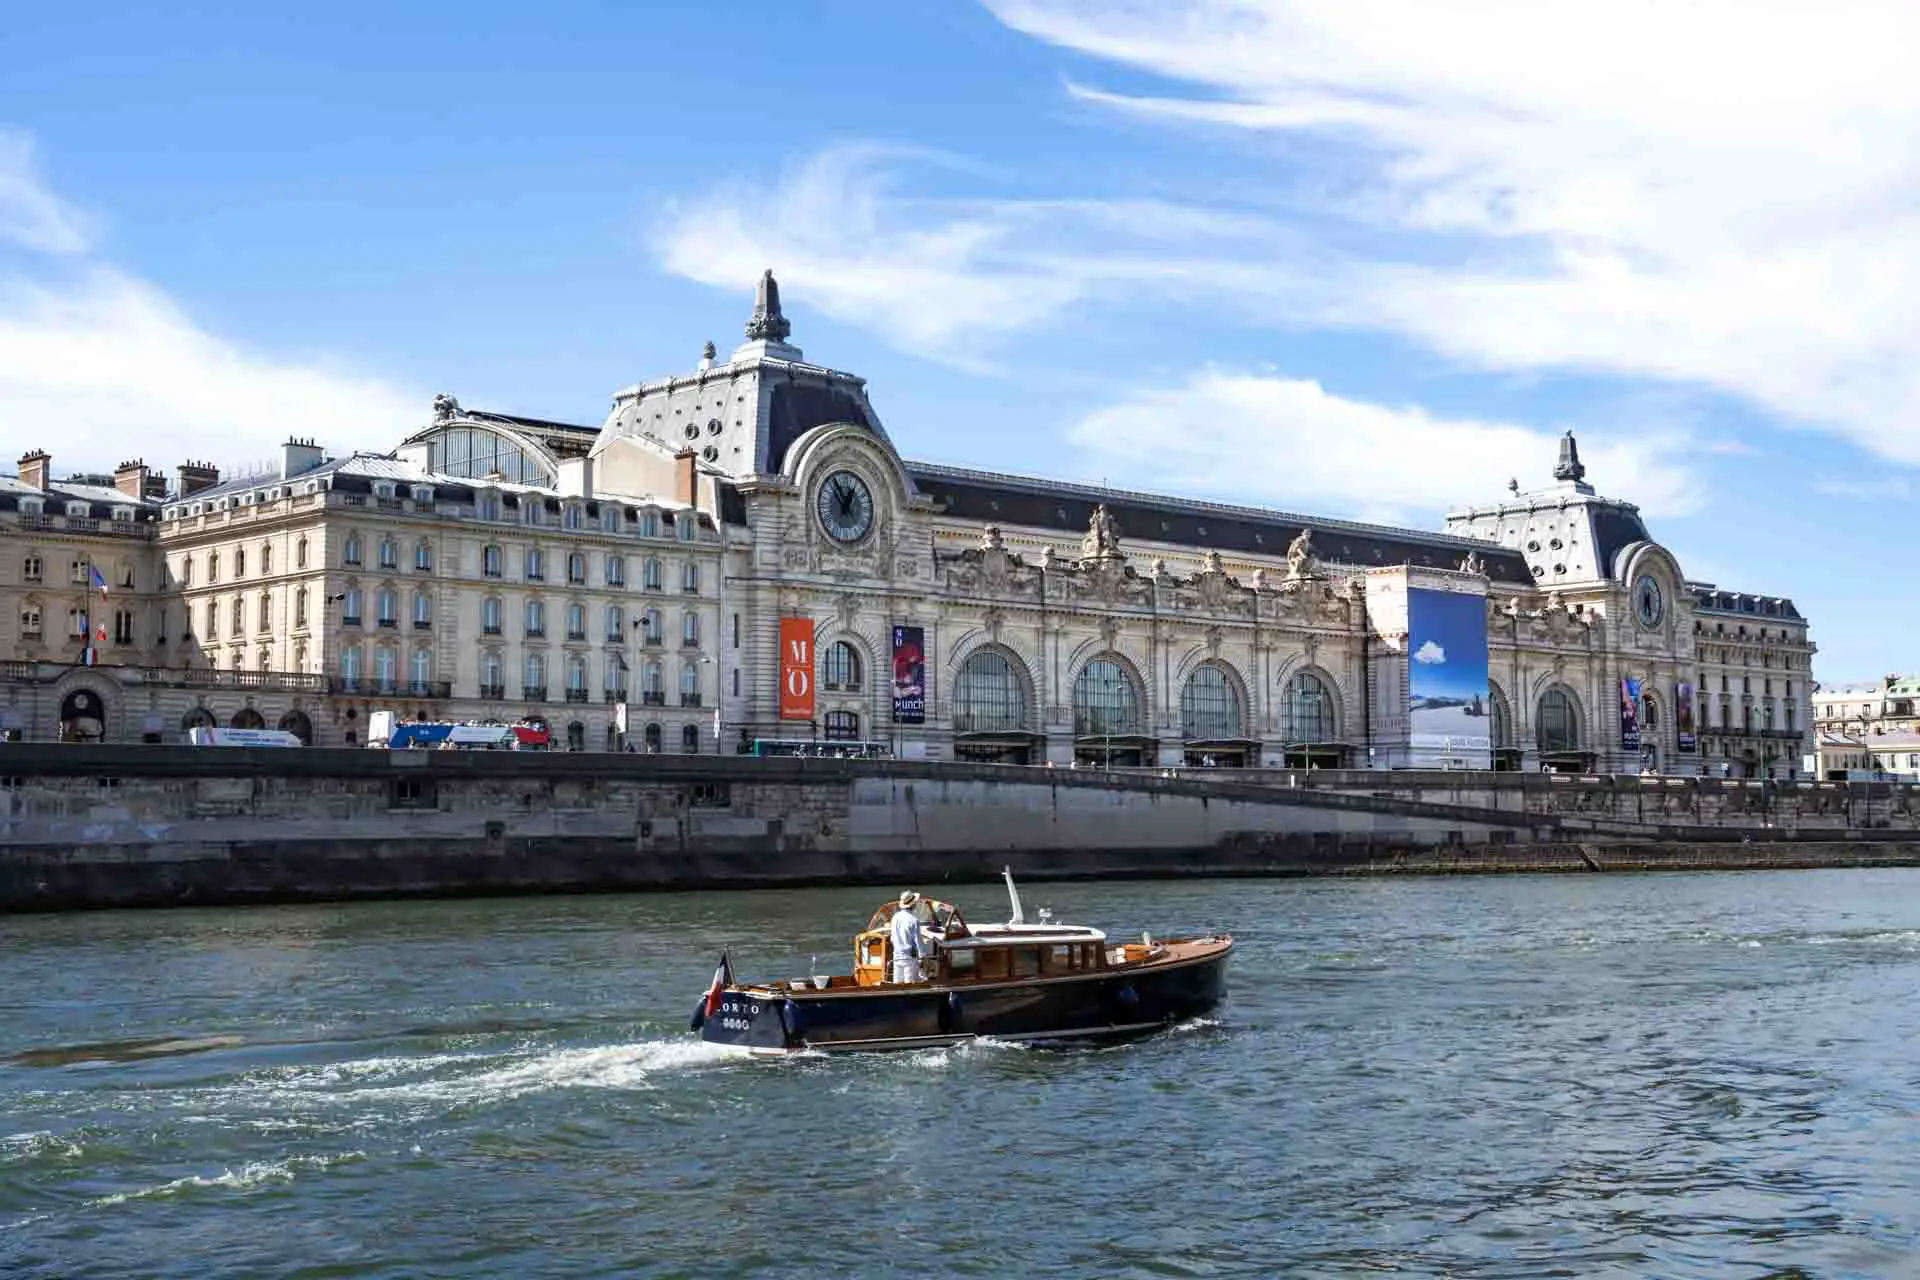 Wooden boat cruising along the River Seine passed a large Beaux-Arts building